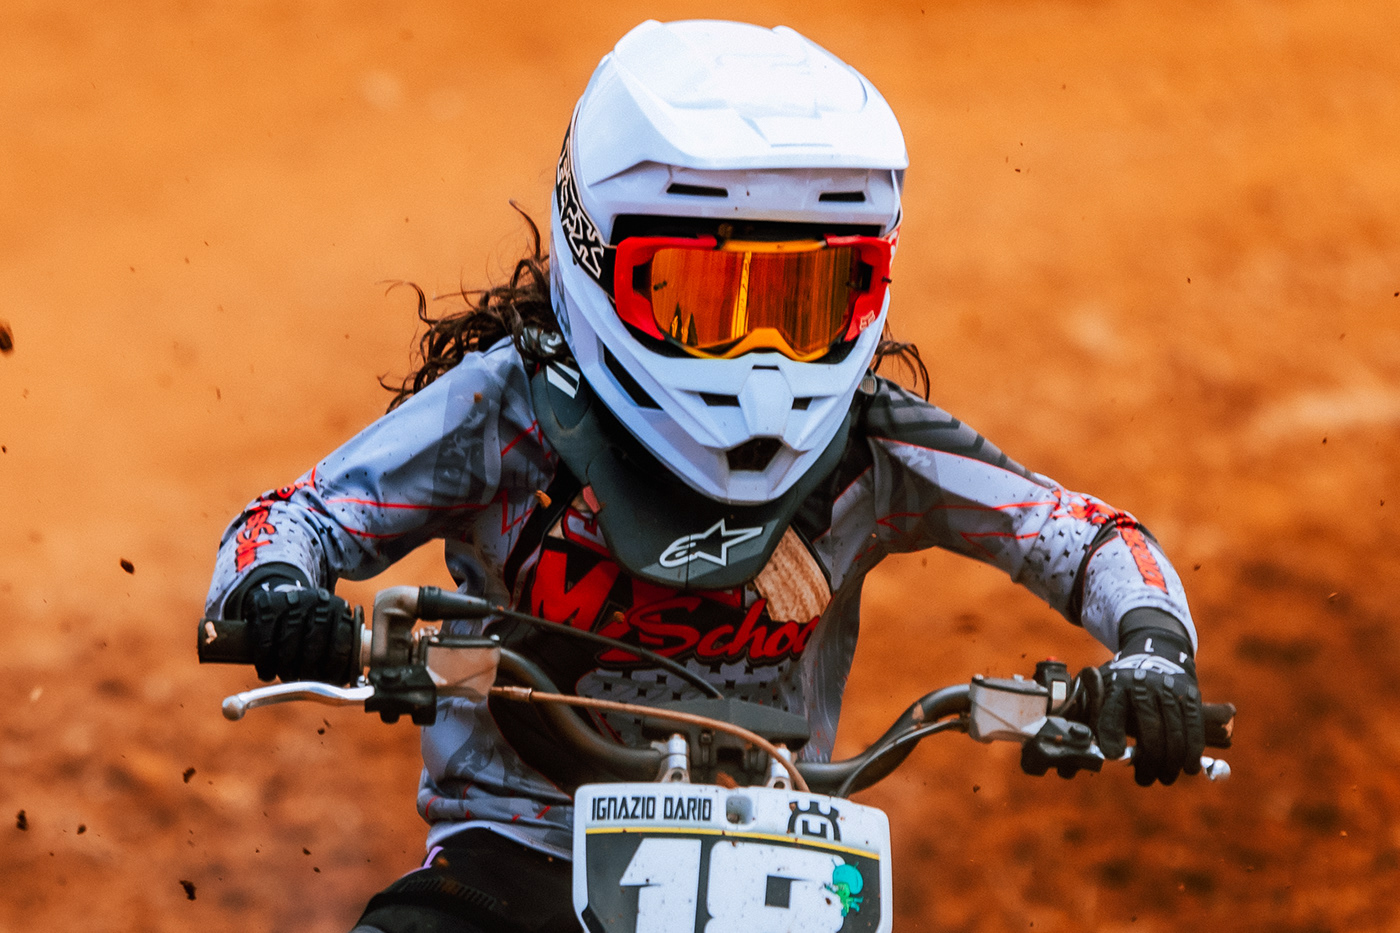 action sports dirtbike extreme sport Motocross Motorsport mx Photography  Racing sportphotography